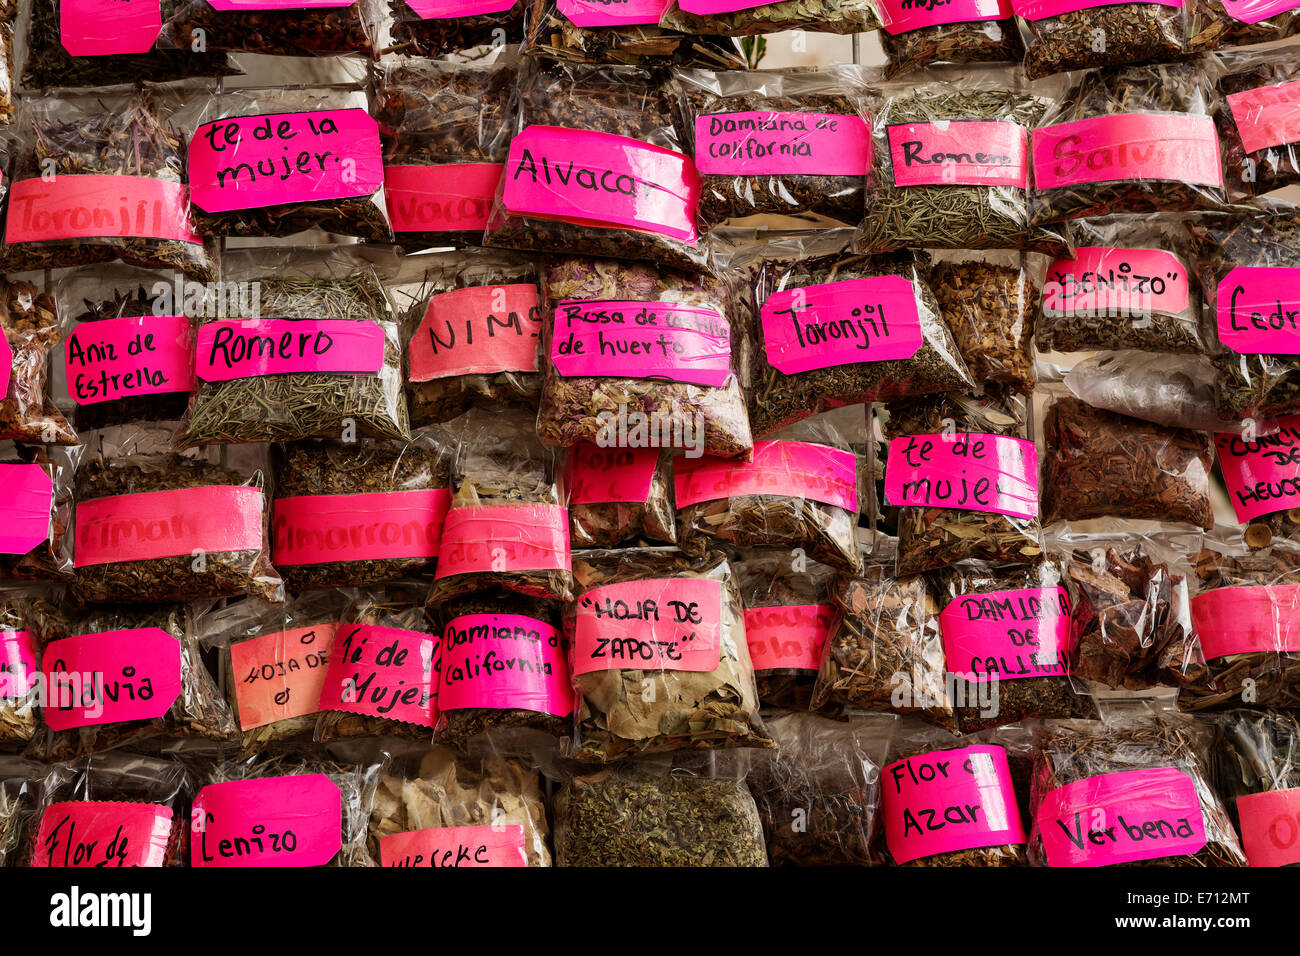 Mexican naturopath herbs sold at street vendors Stock Photo